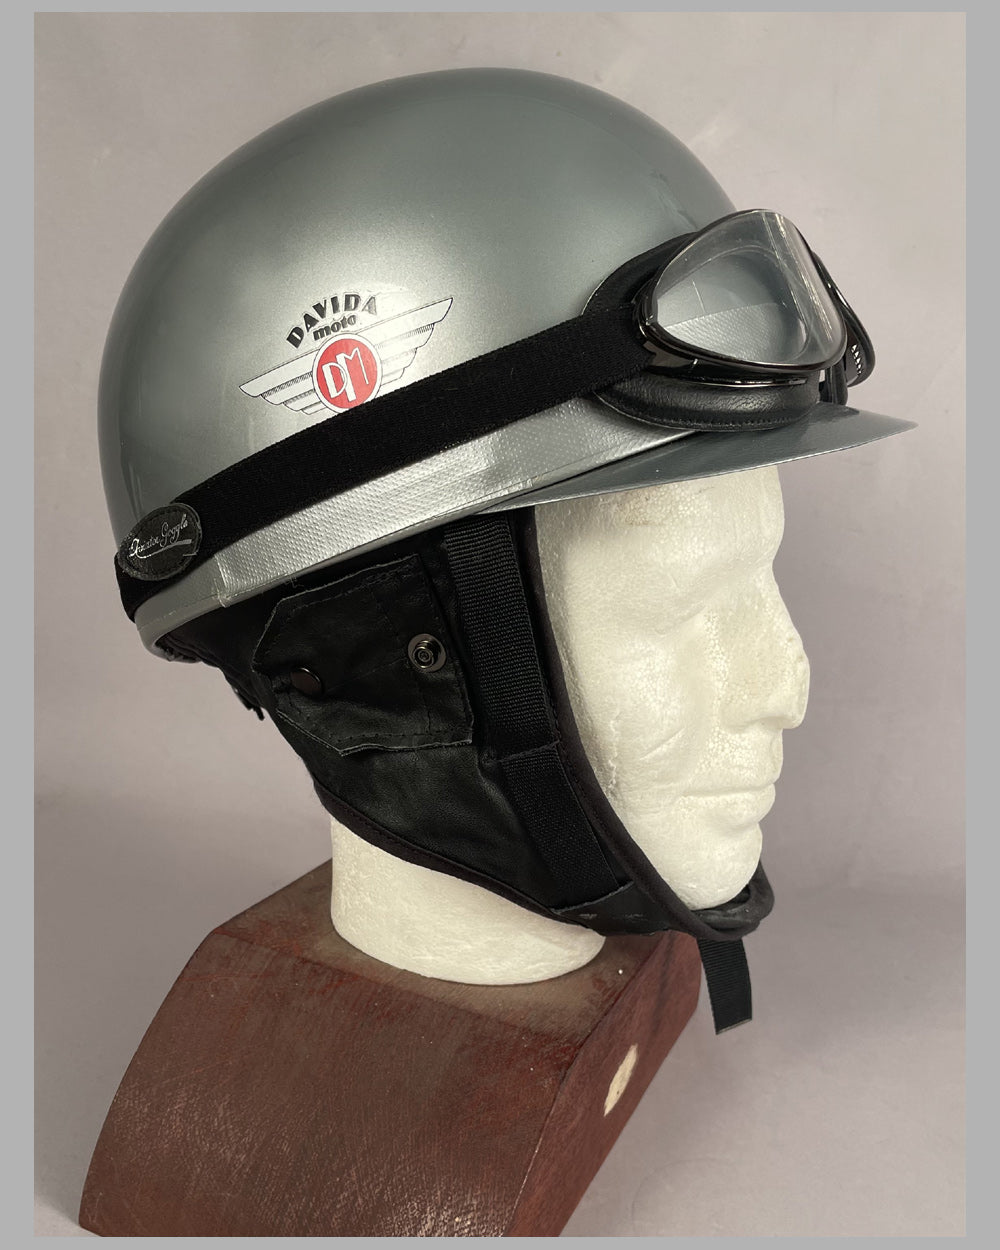 Open face helmet and large old fashioned aviator goggles